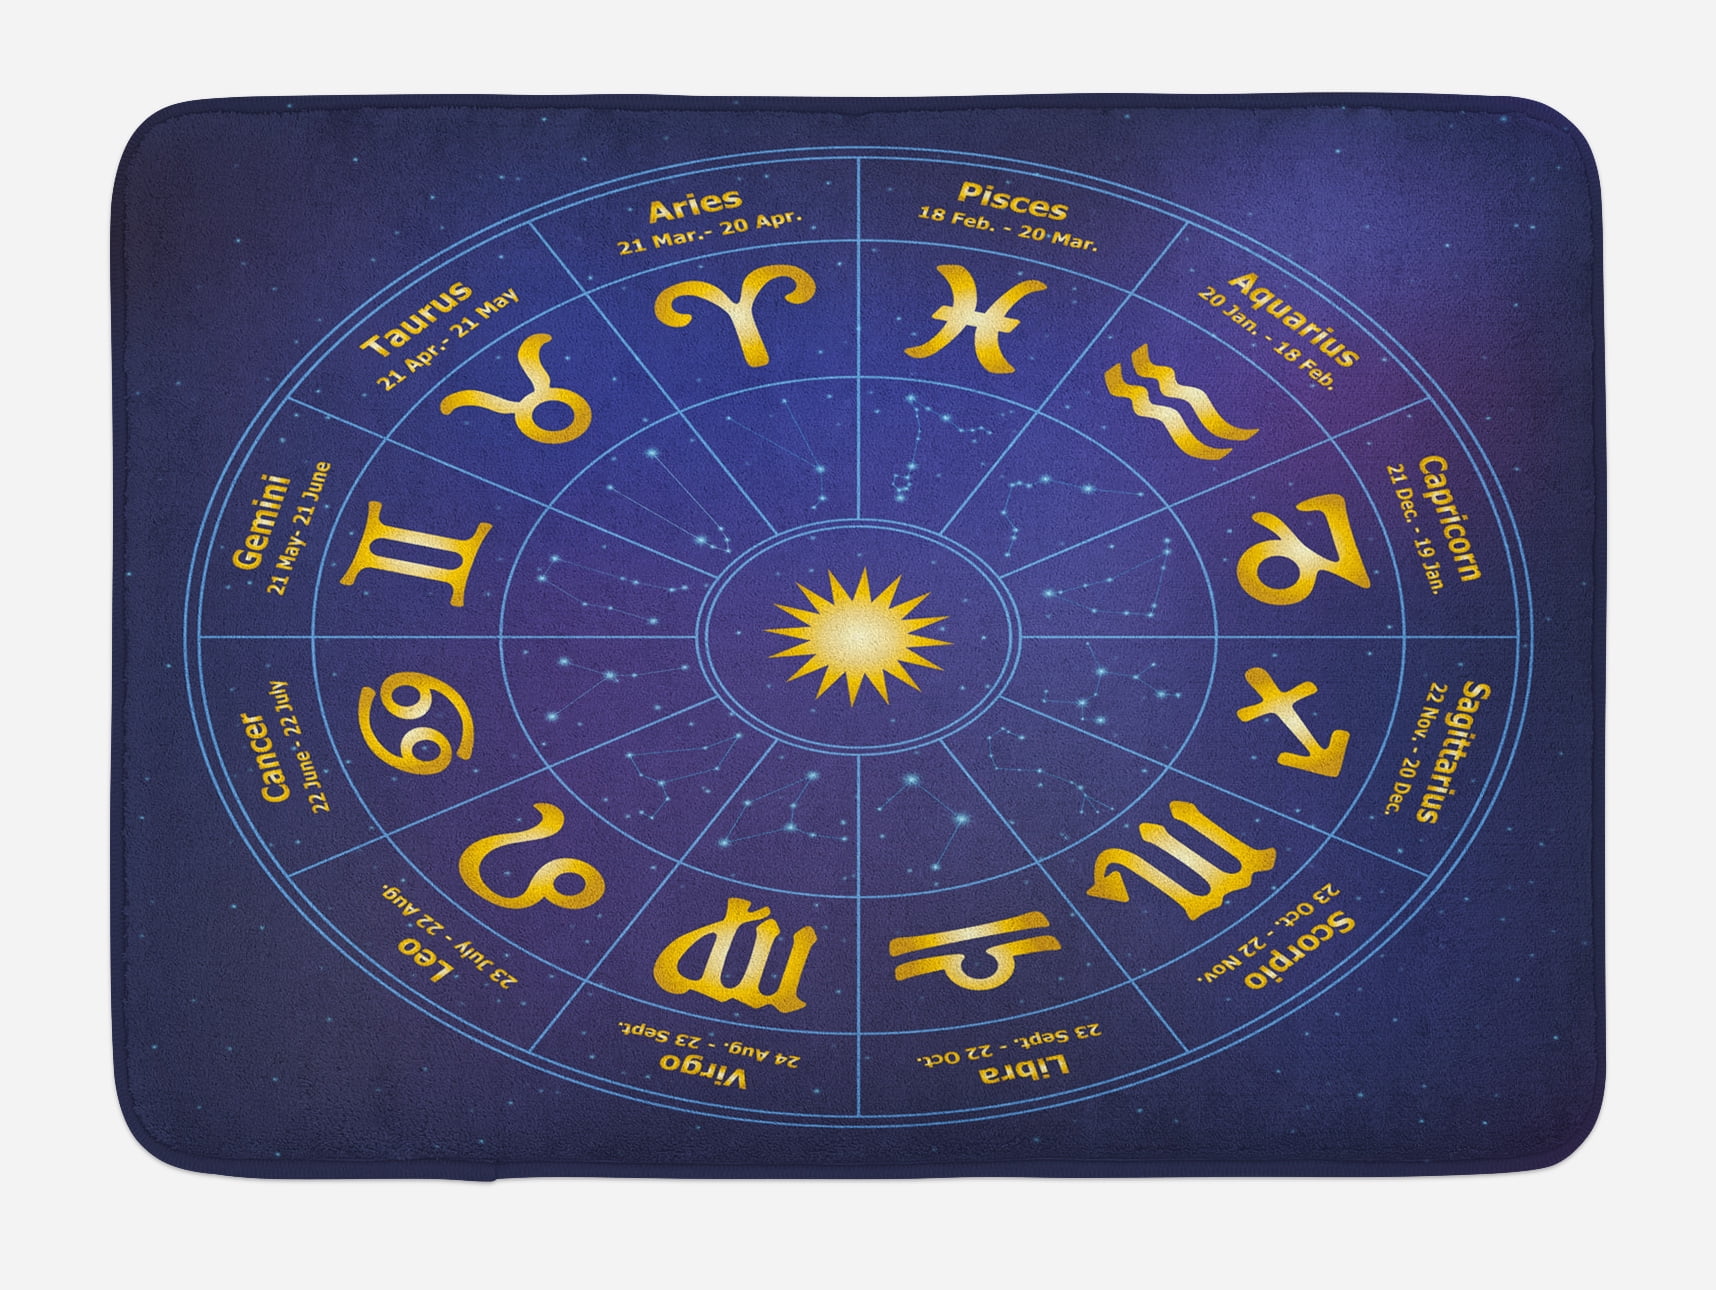 Astrology Bath Mat, Horoscope Zodiac Signs with Birth Dates in Circle ...